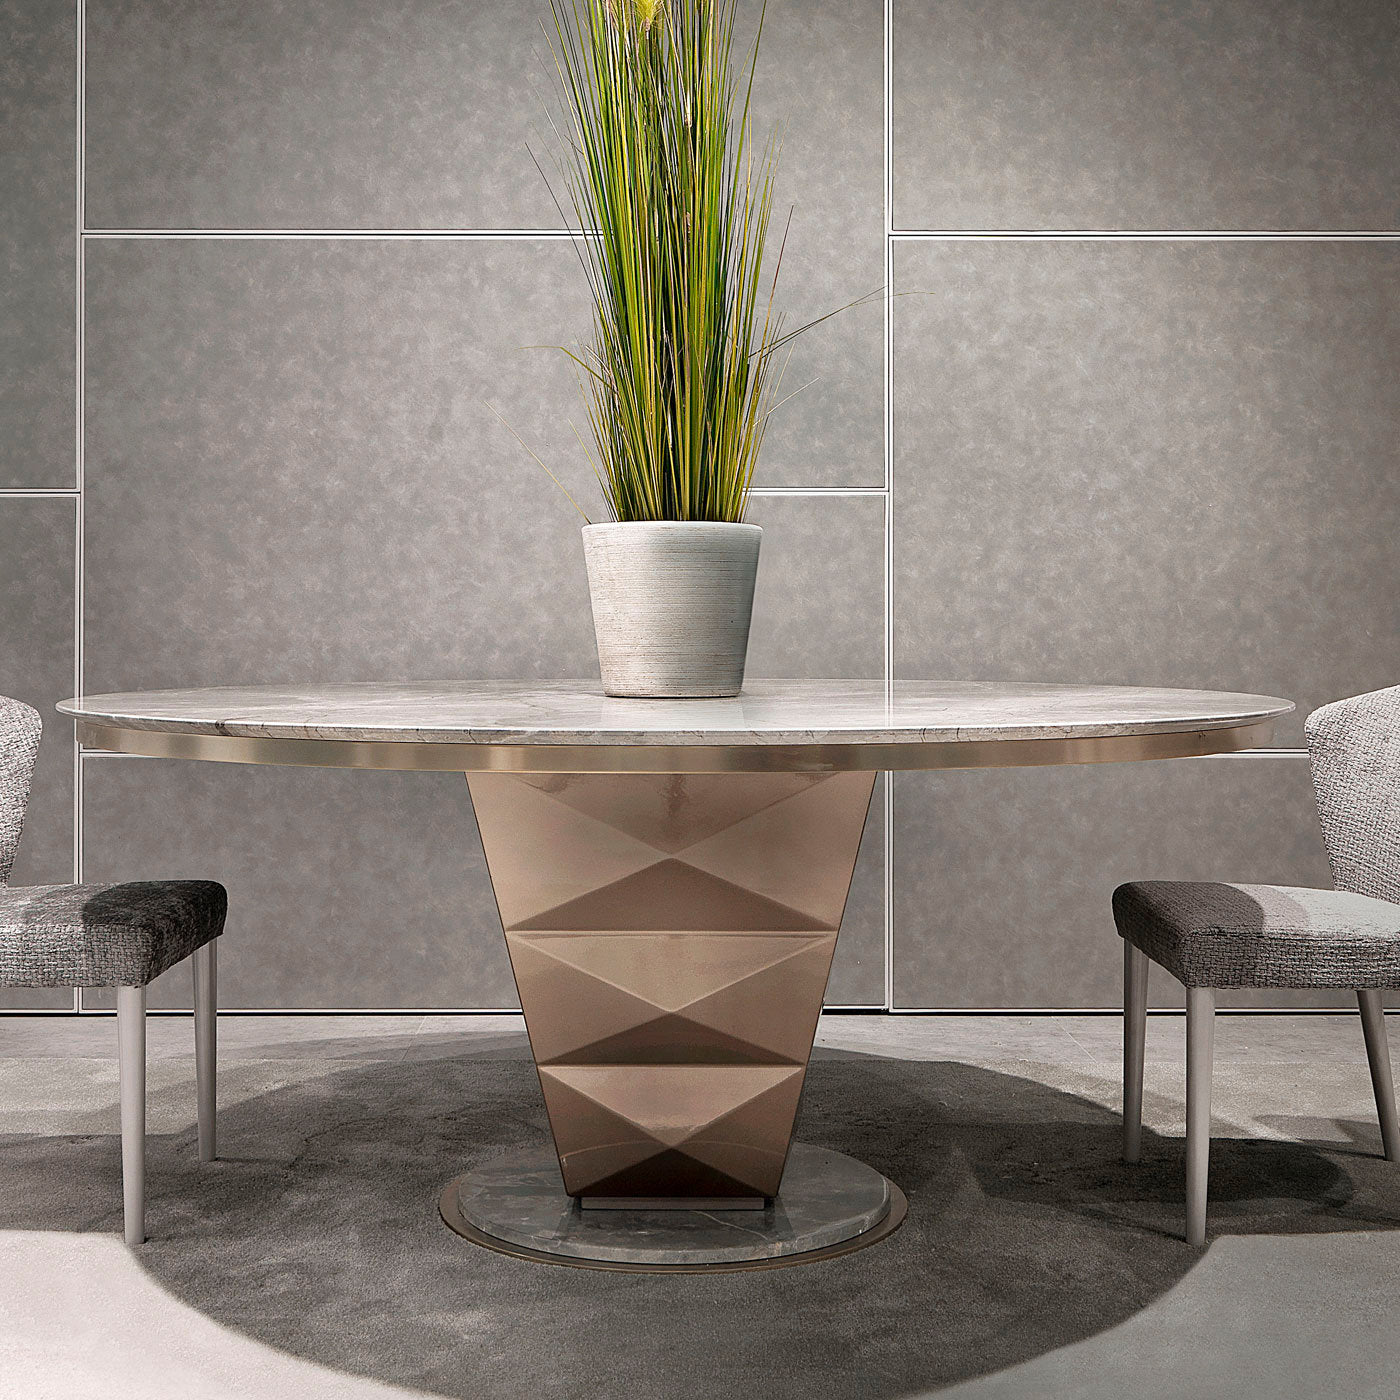 Erik Round Marble Dining Table By Loriano Barani - Alternative view 3